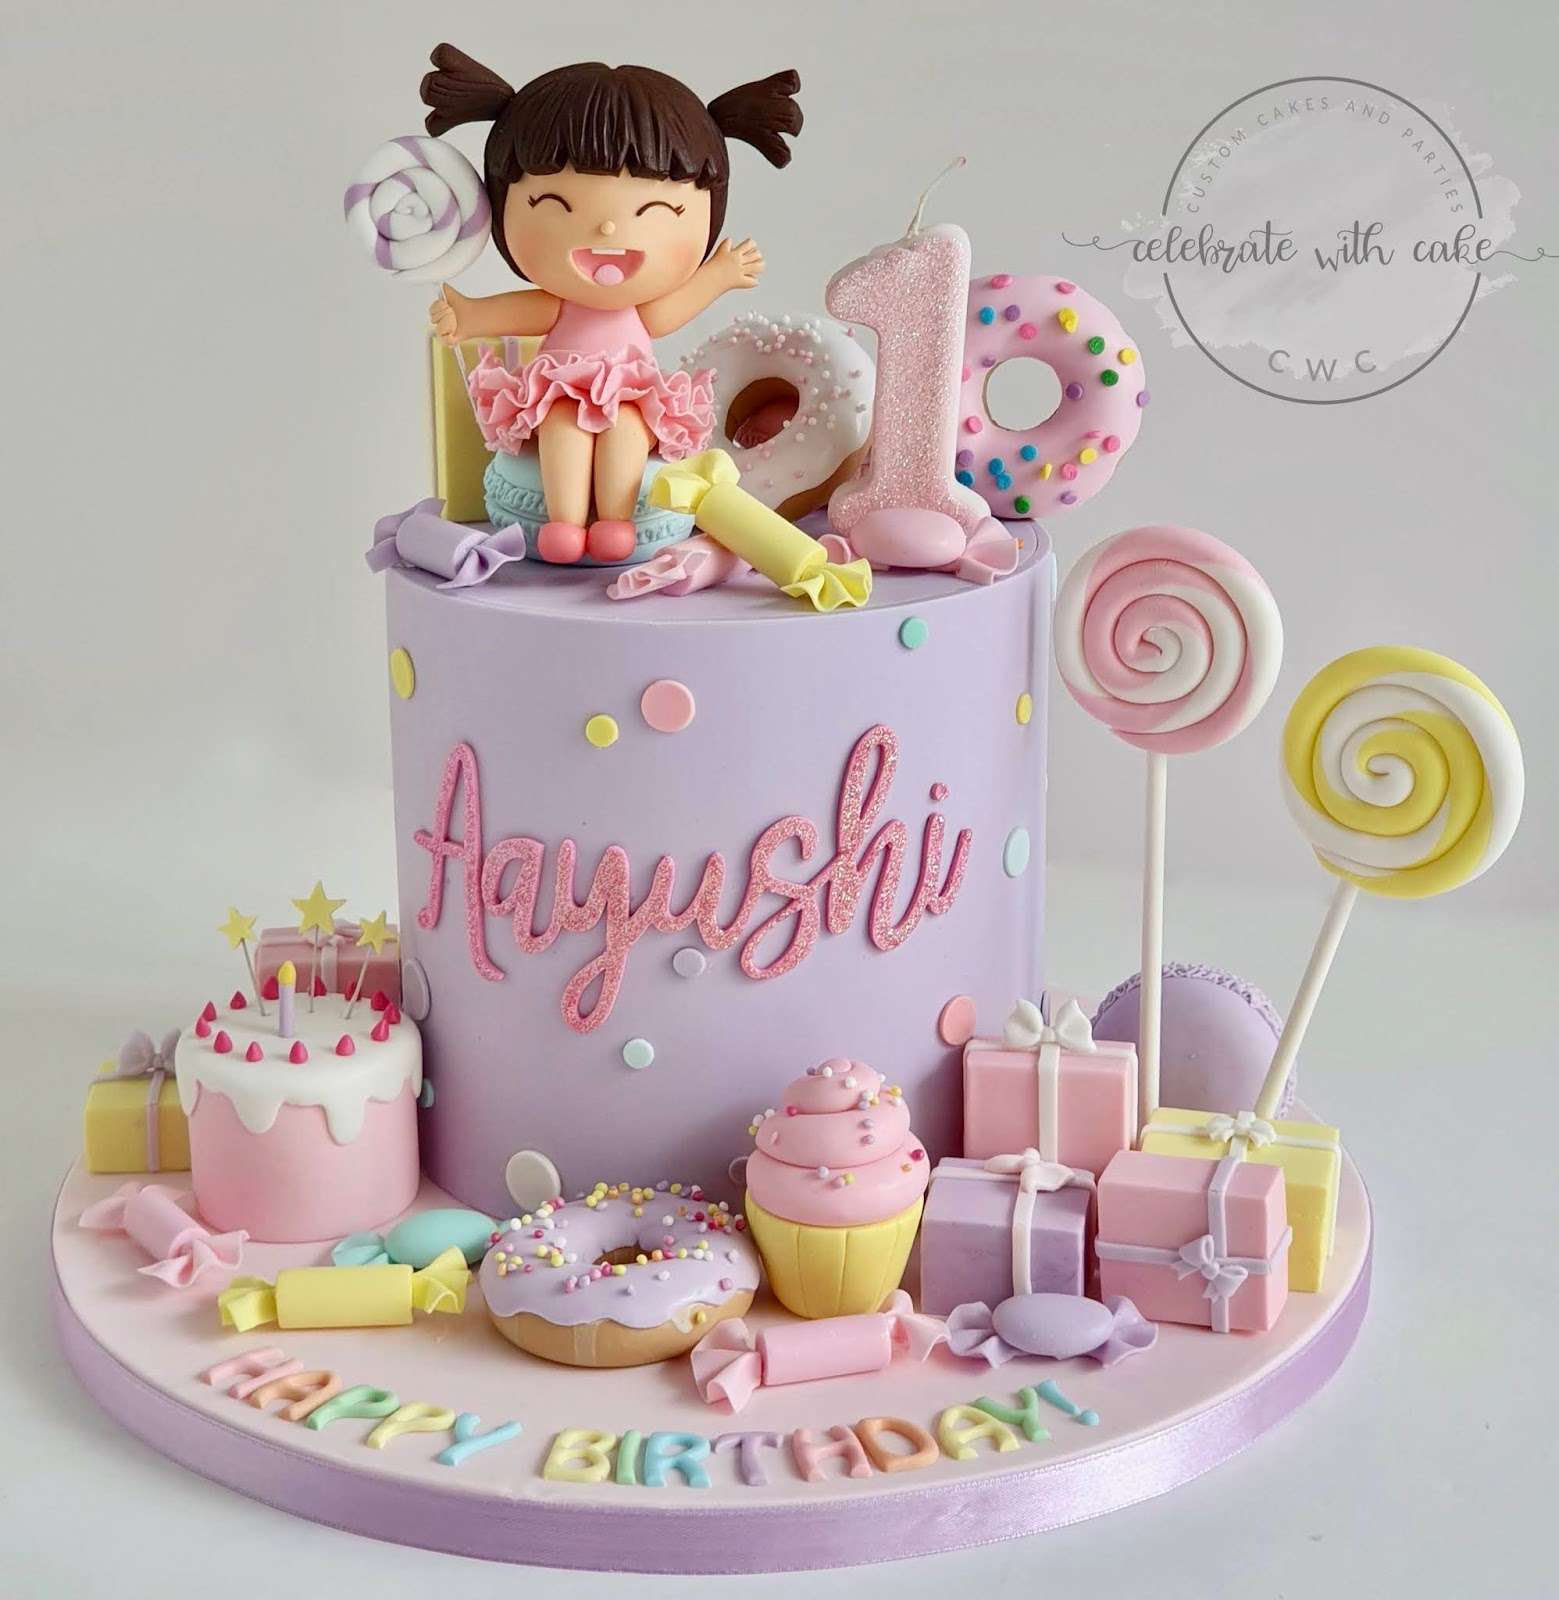 Celebrate with Cake!: Girl in Candyland 1st birthday Single tier Cake